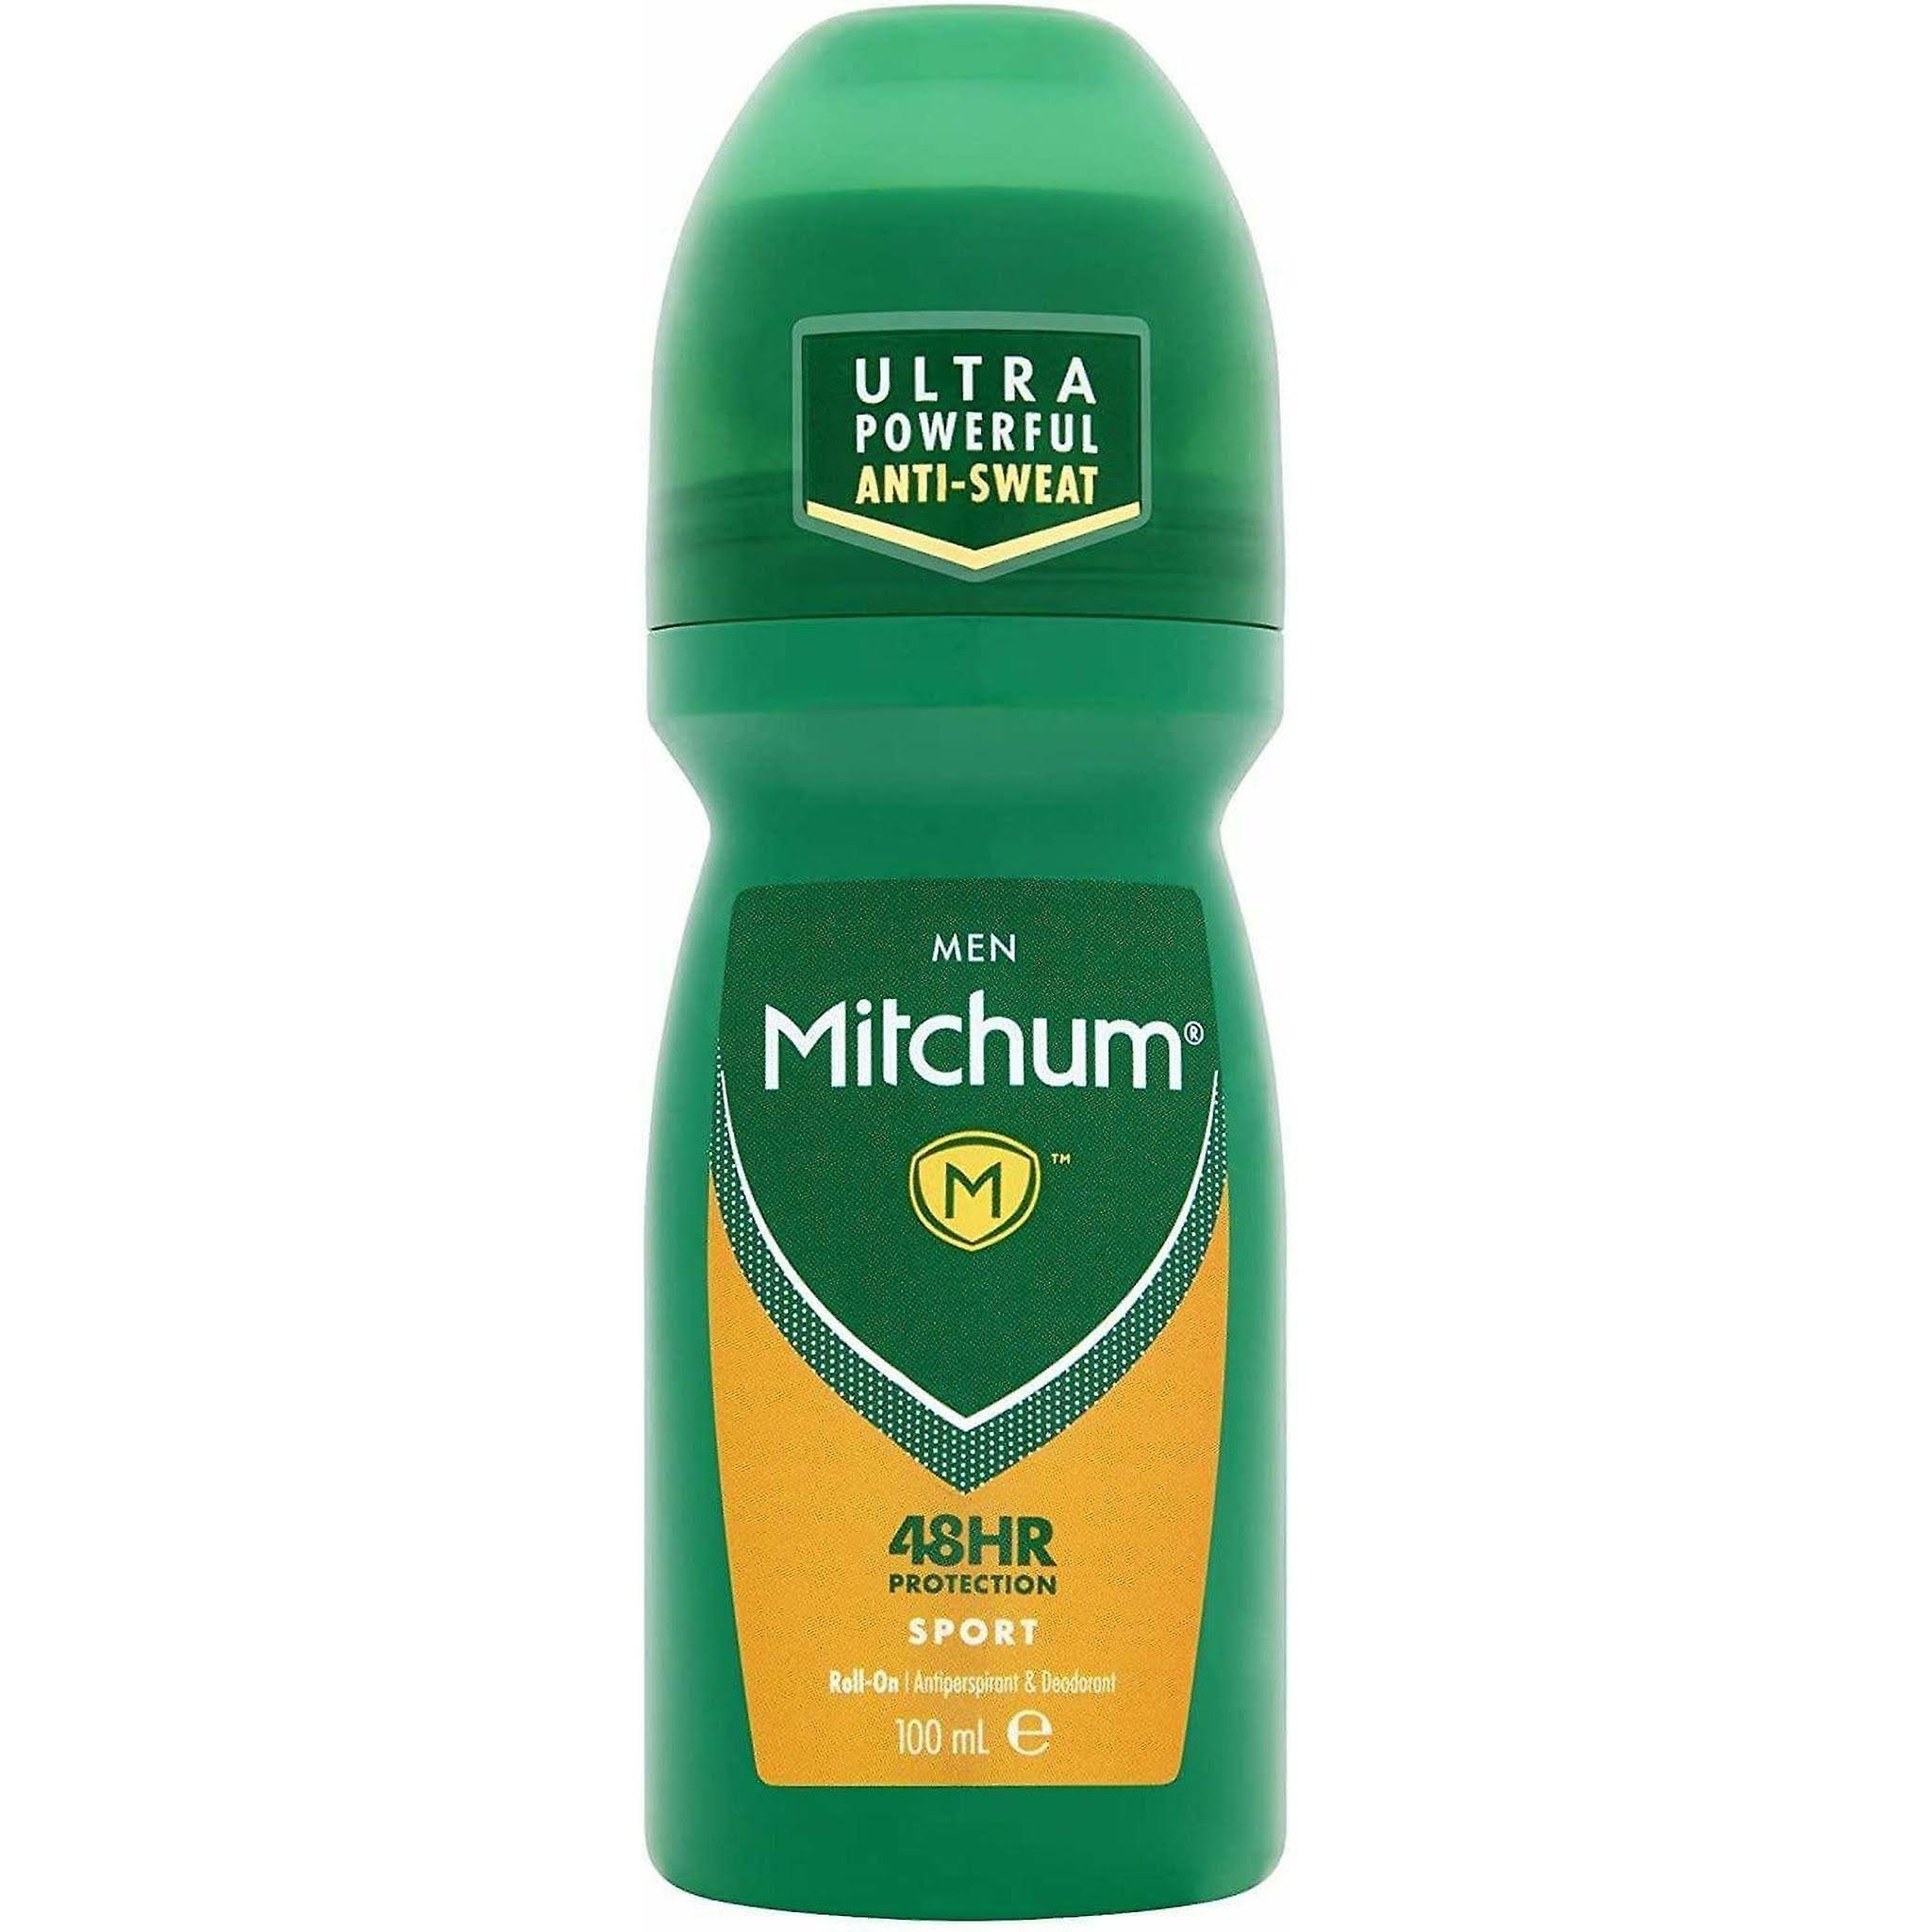 Mitchum Men 48HR Protection Sport Anti Perspirant and Deodorant Roll On - 100ml